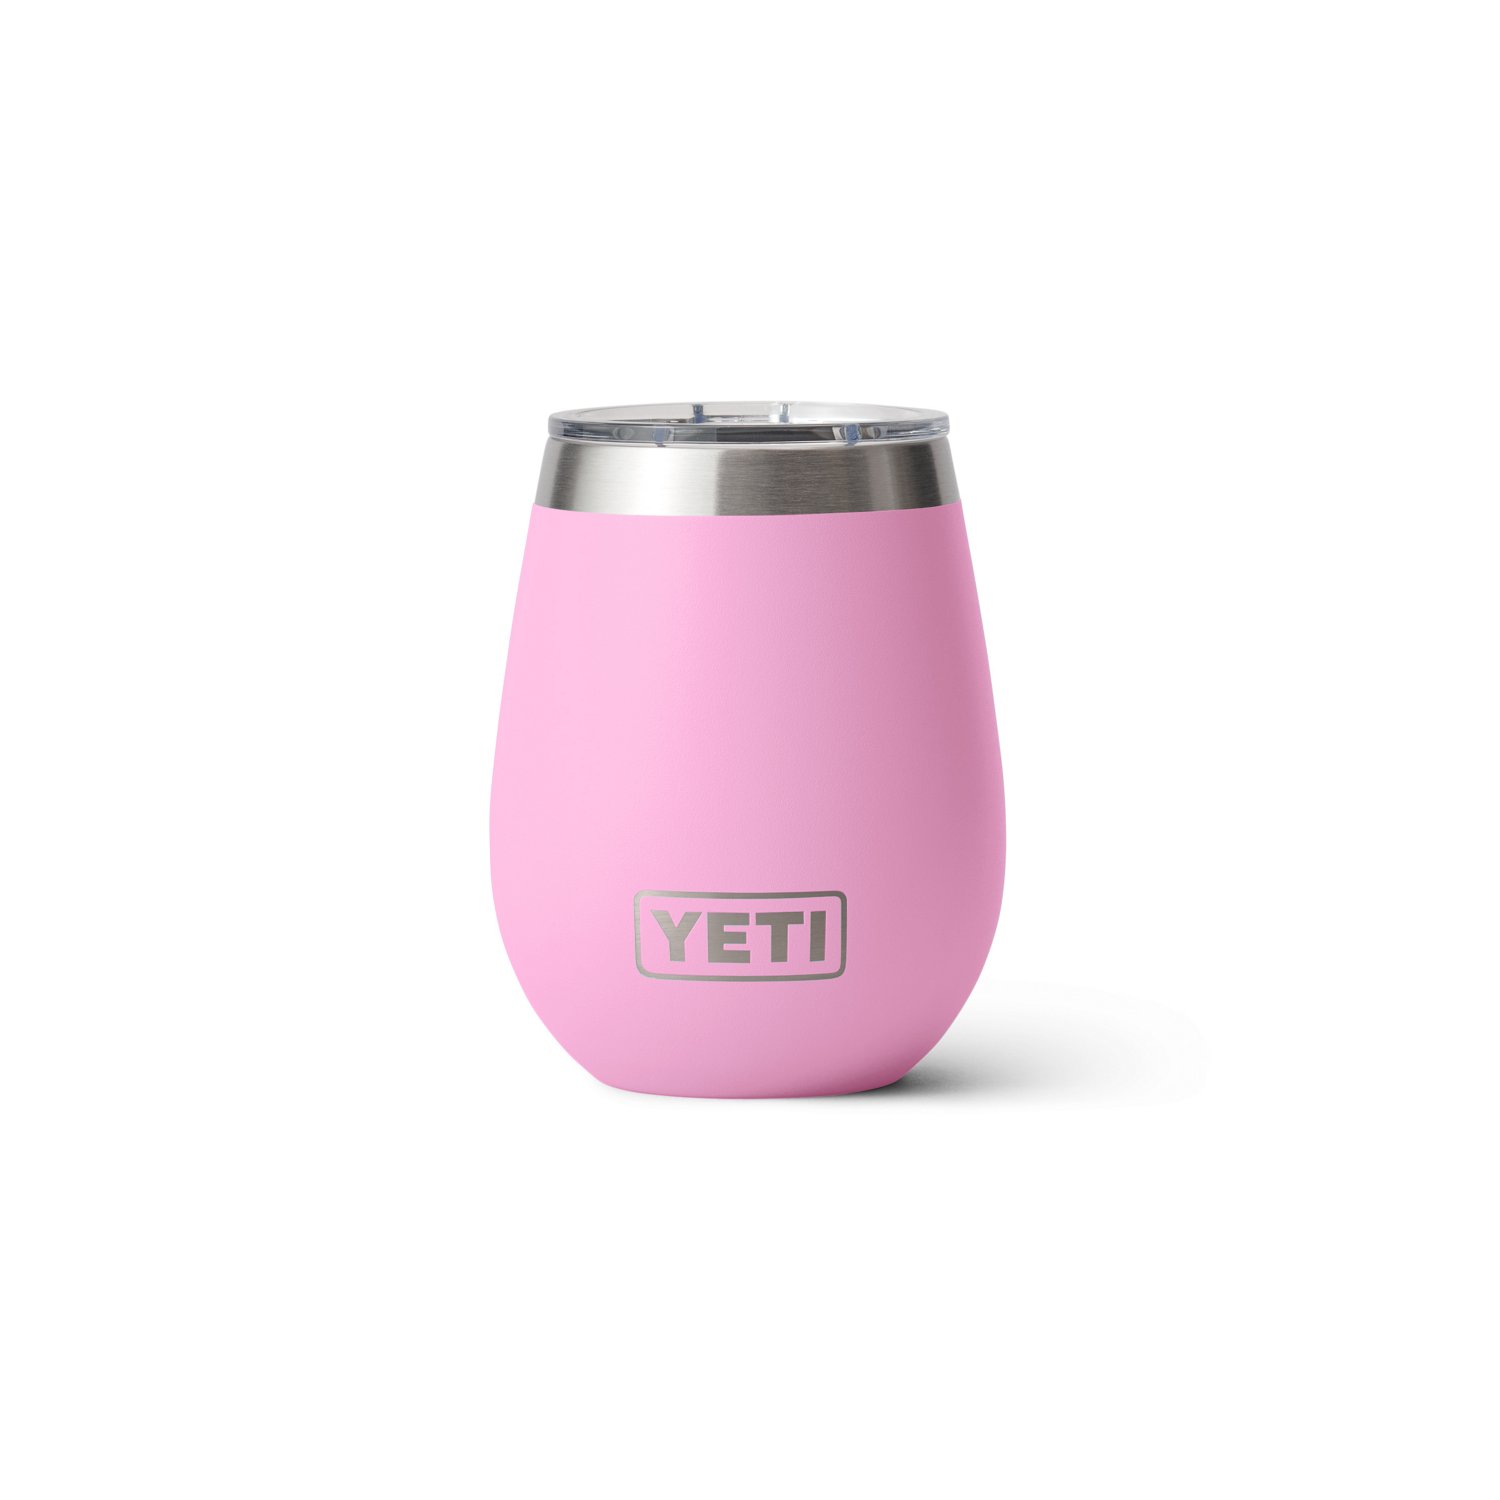 https://academy.scene7.com/is/image/academy//drinkware/yeti-rambler-10-oz-wine-tumbler-with-magslider-lid-21071501927-pink/5af07e8335ab47e3a3e41b080b73acea?$pdp-mobile-gallery-ng$